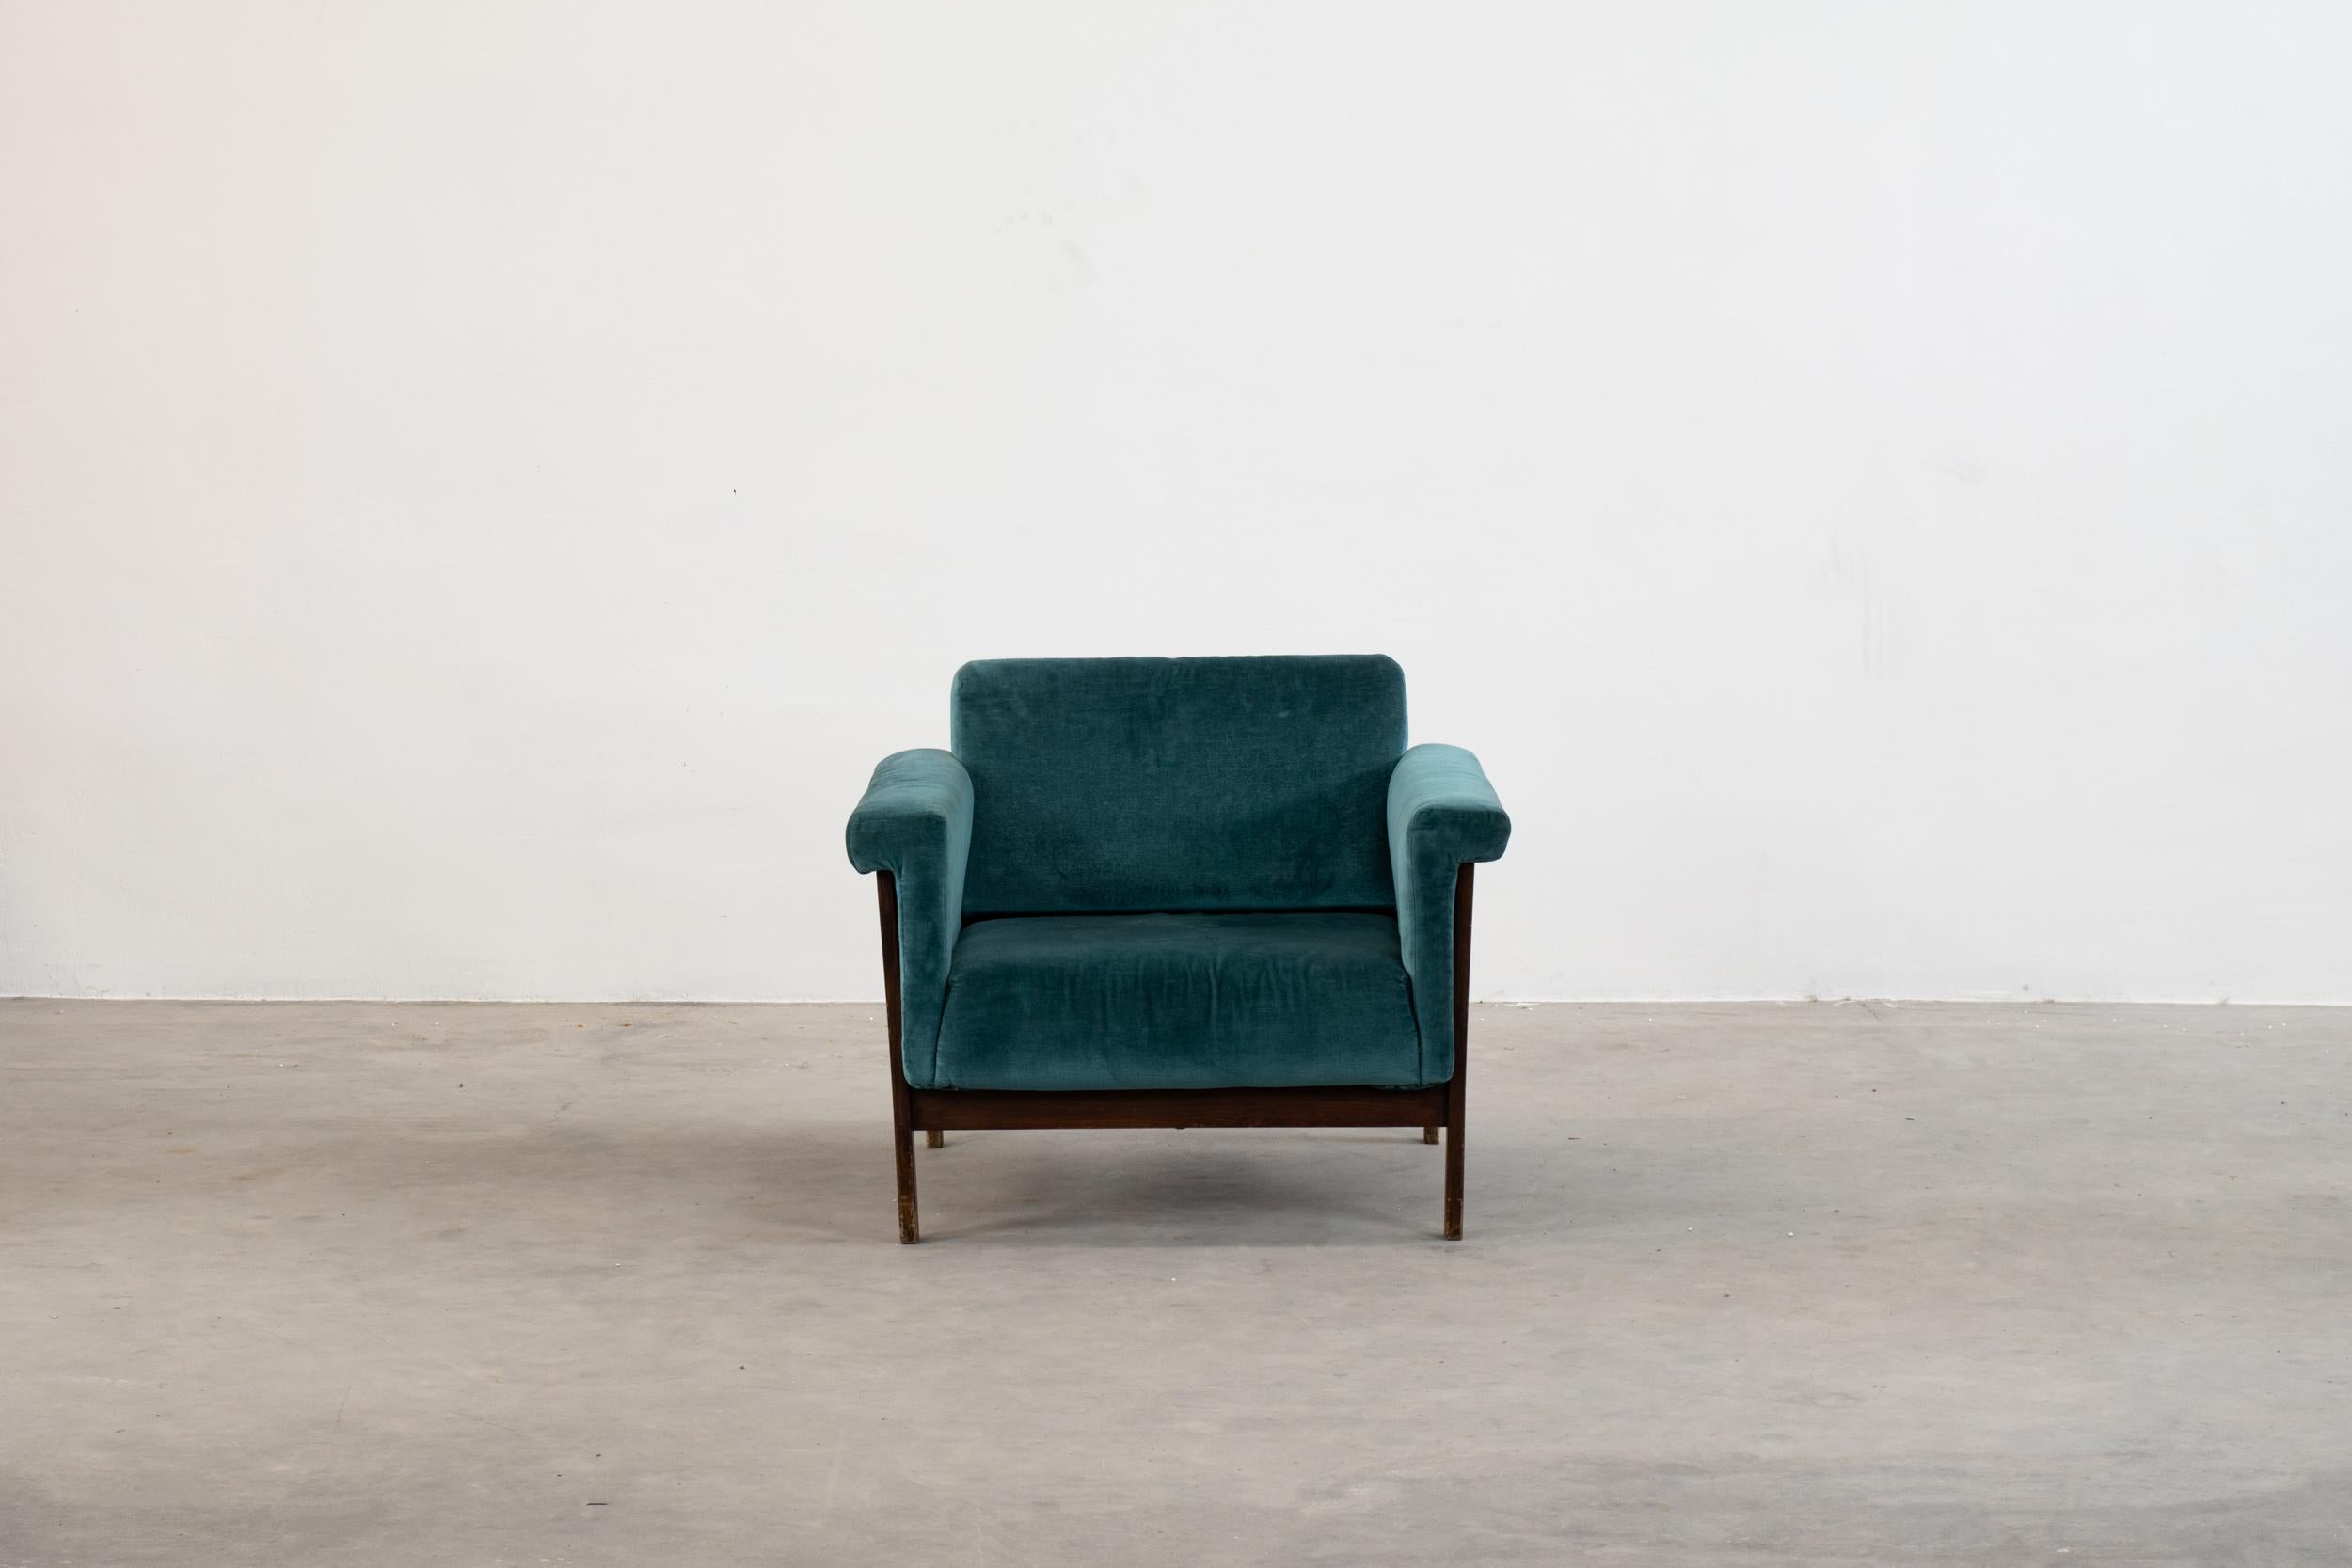 Canada settee armchair with a structure in wood, seat and back in padded blue-green velvet. 
It was designed by Ettore Sottsass Jr in 1959 and produced by the Italian company Poltronova during the 1960s. 

Licterature: P. C. Santini, Facendo